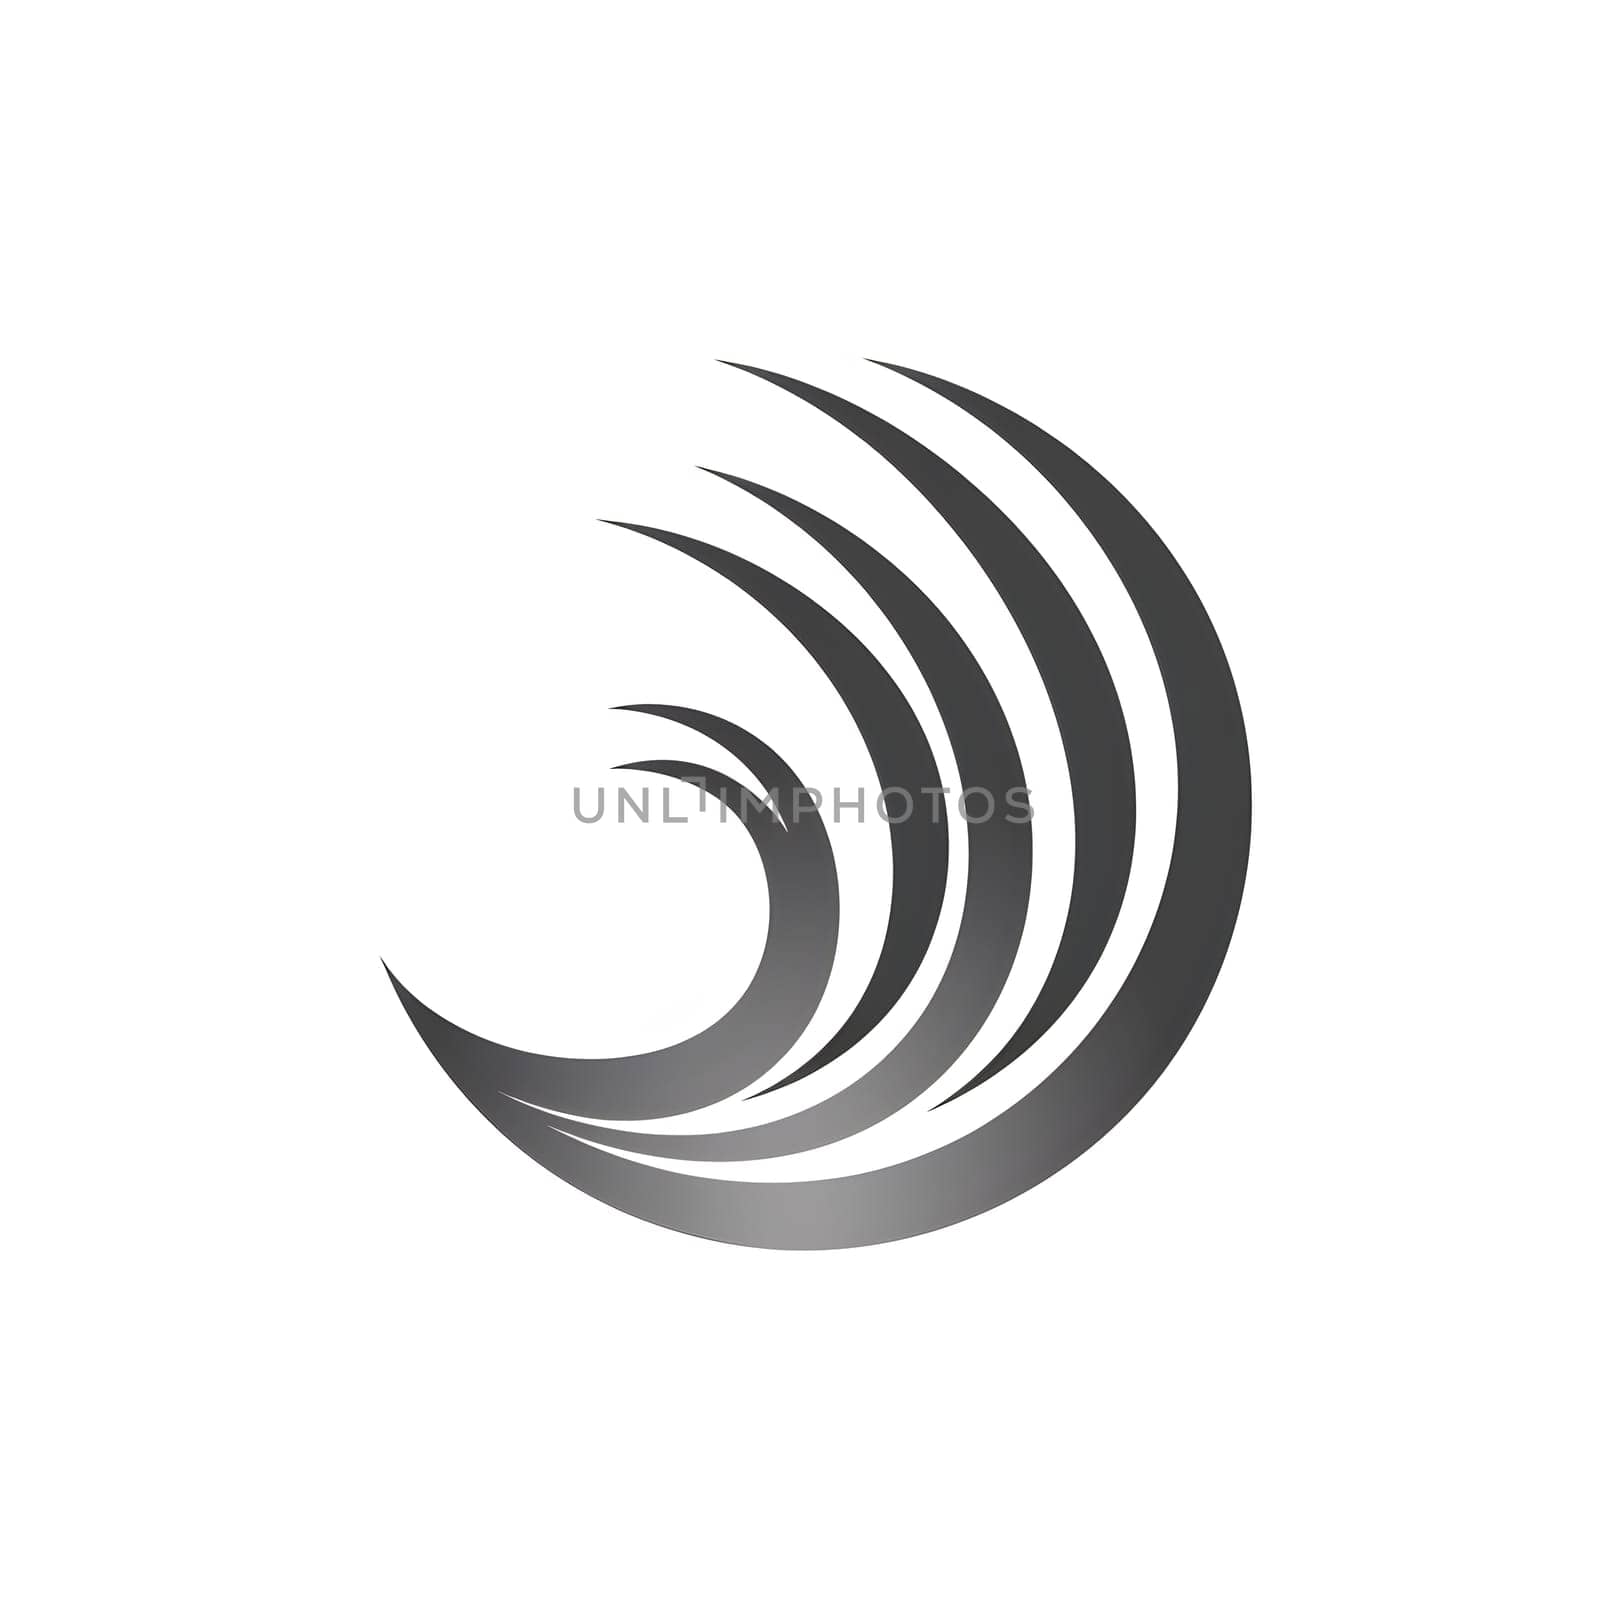 Monochrome wave logo in an artistic circle, symbolizing beauty and grace by Nadtochiy